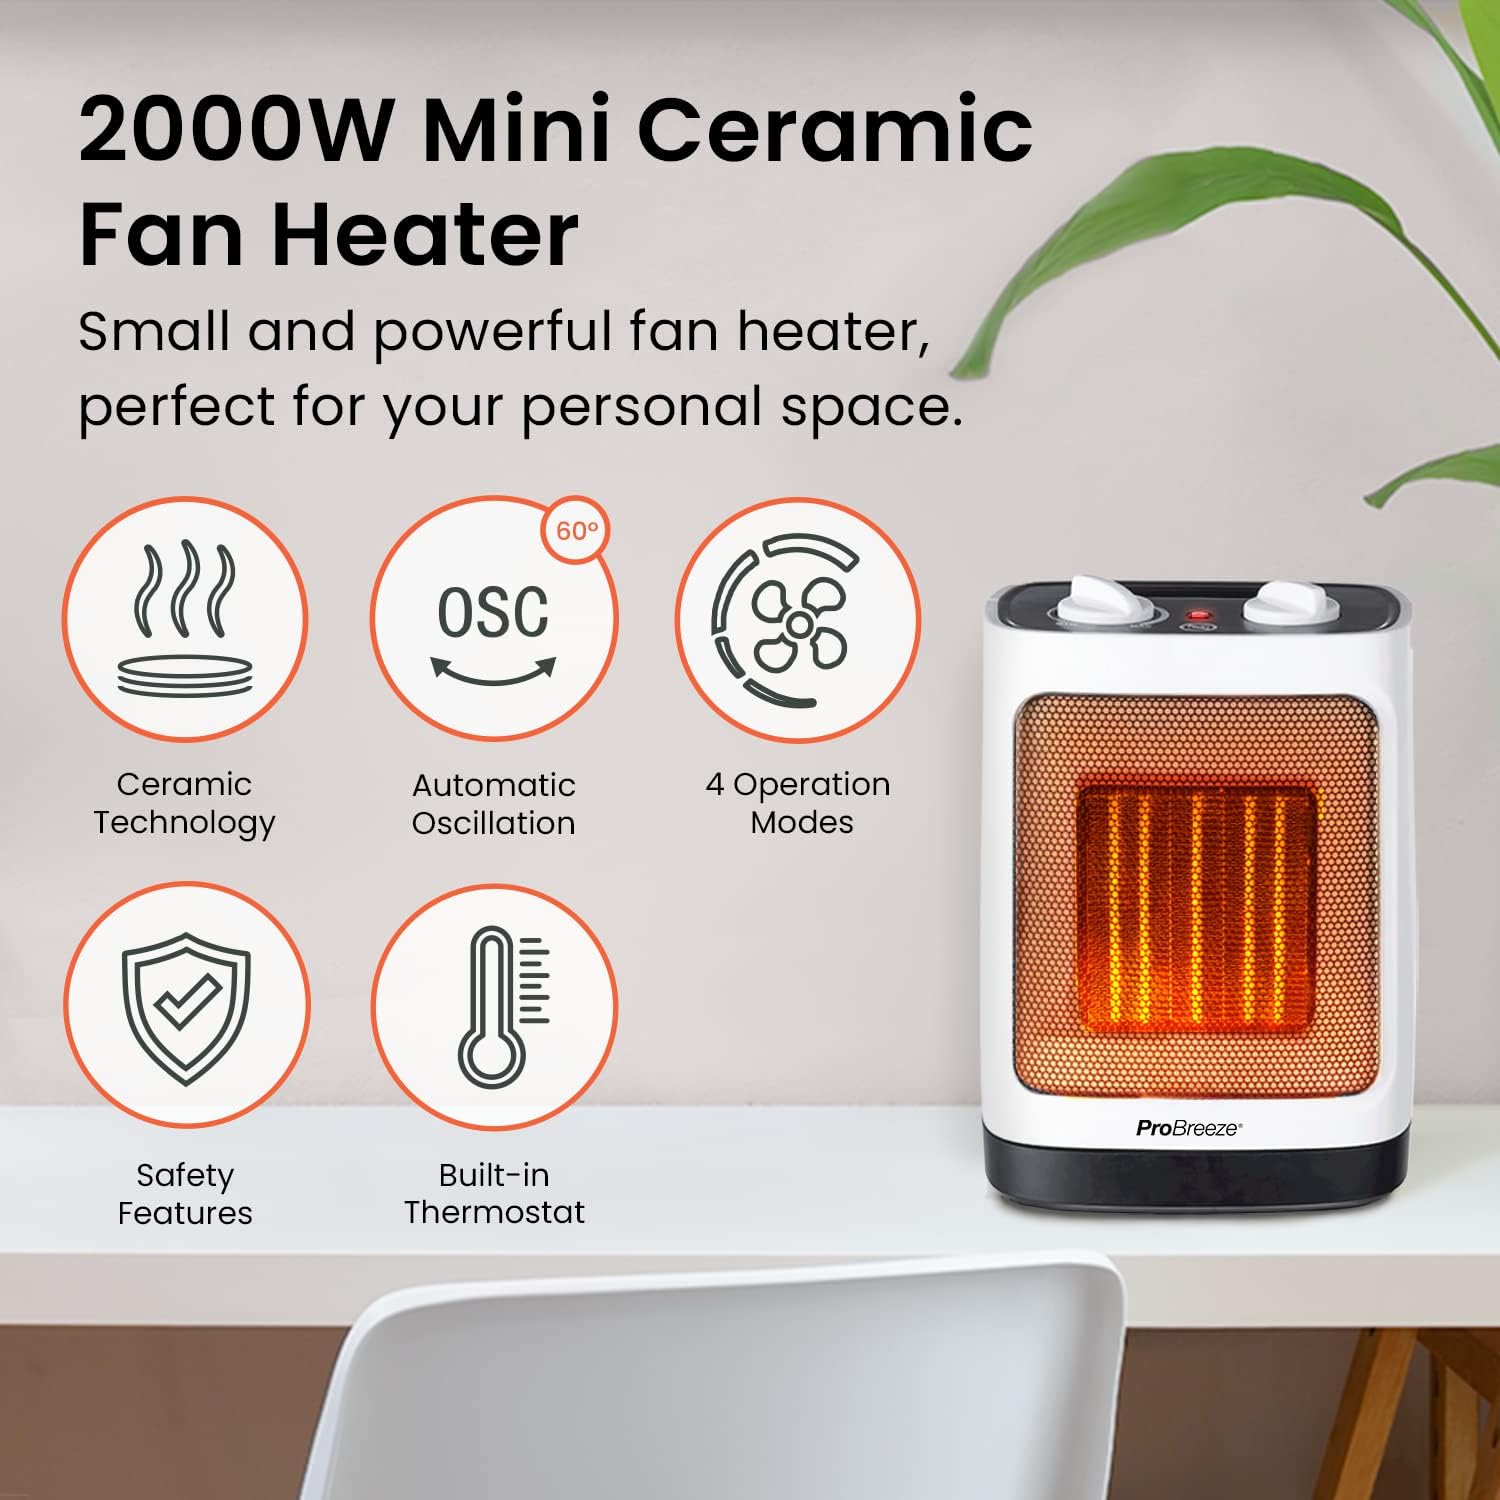 Pro Breeze® 2000W Ceramic Fan Heater - Electric Heater with Automatic Oscillation, Thermostat, 2 Heat Settings & Tip-Over Protection - Portable Heater...